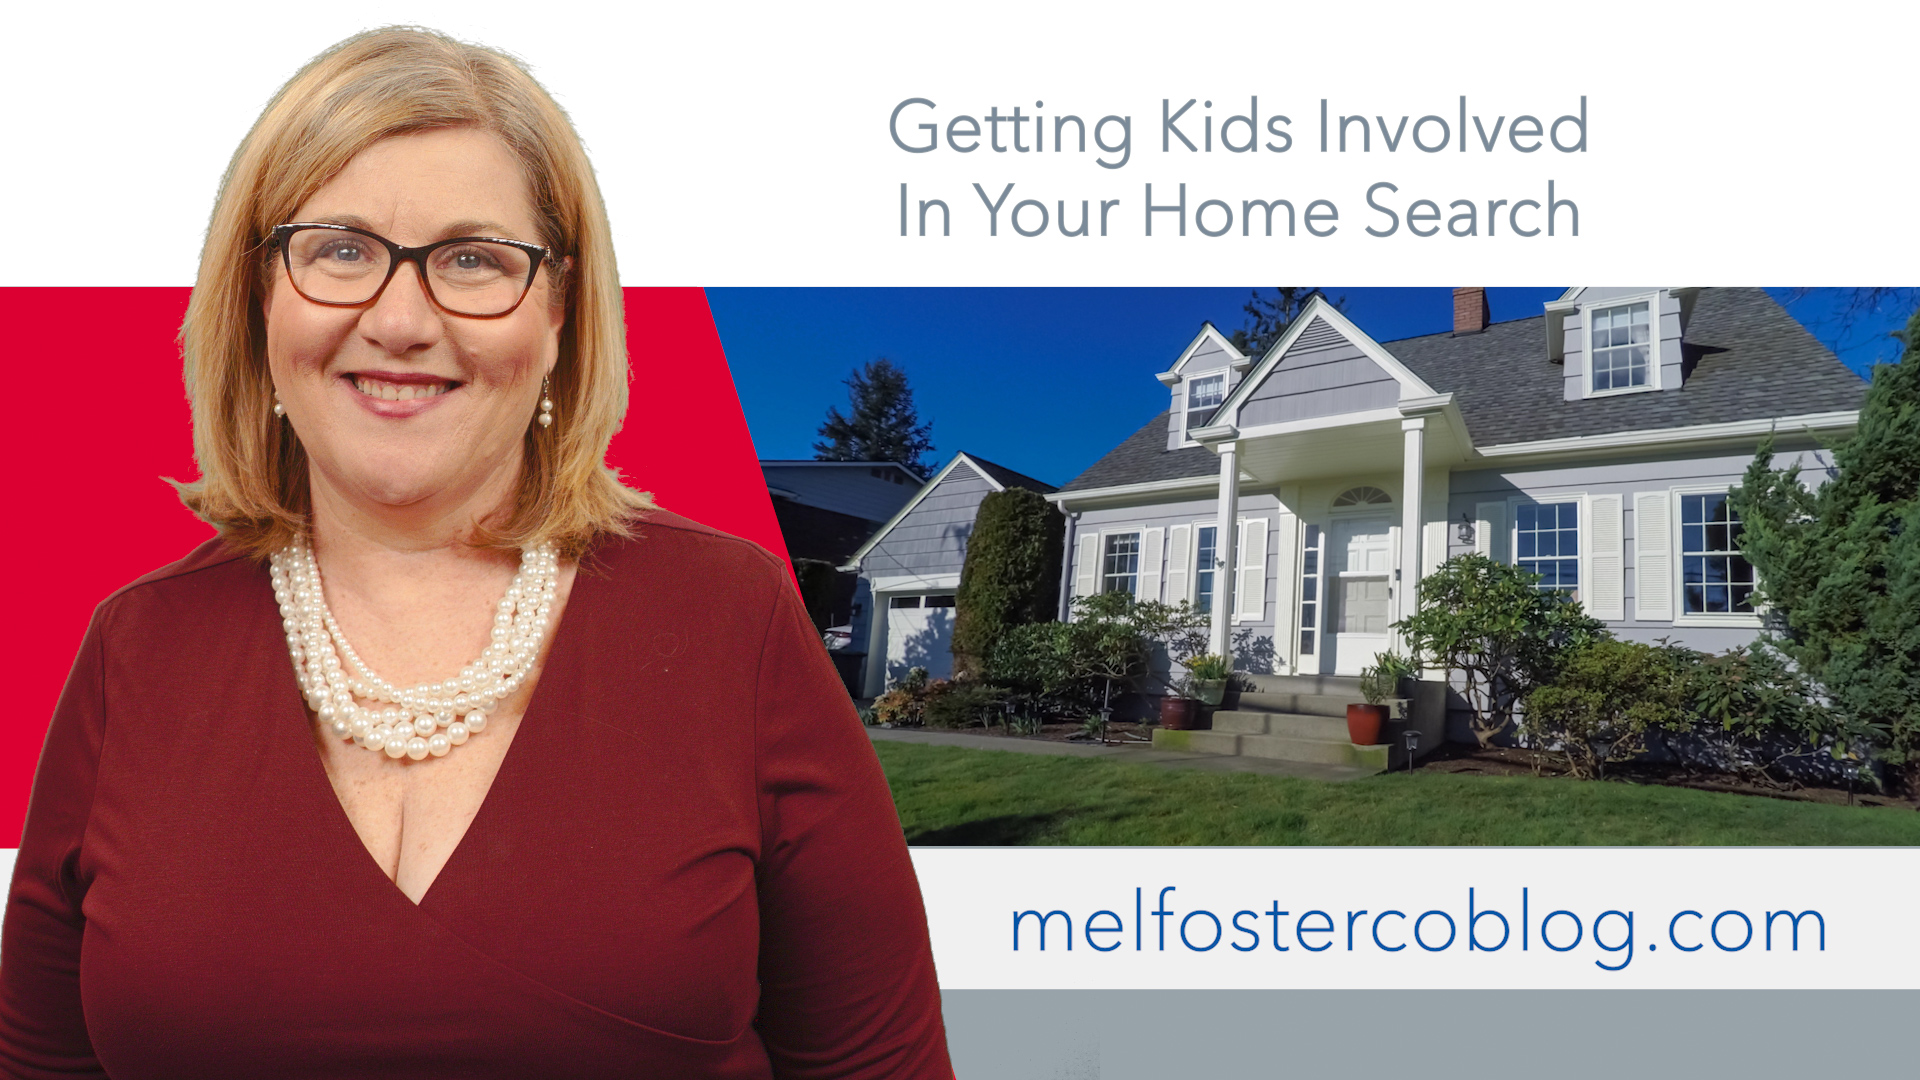 Getting Kids Involved in Home Search